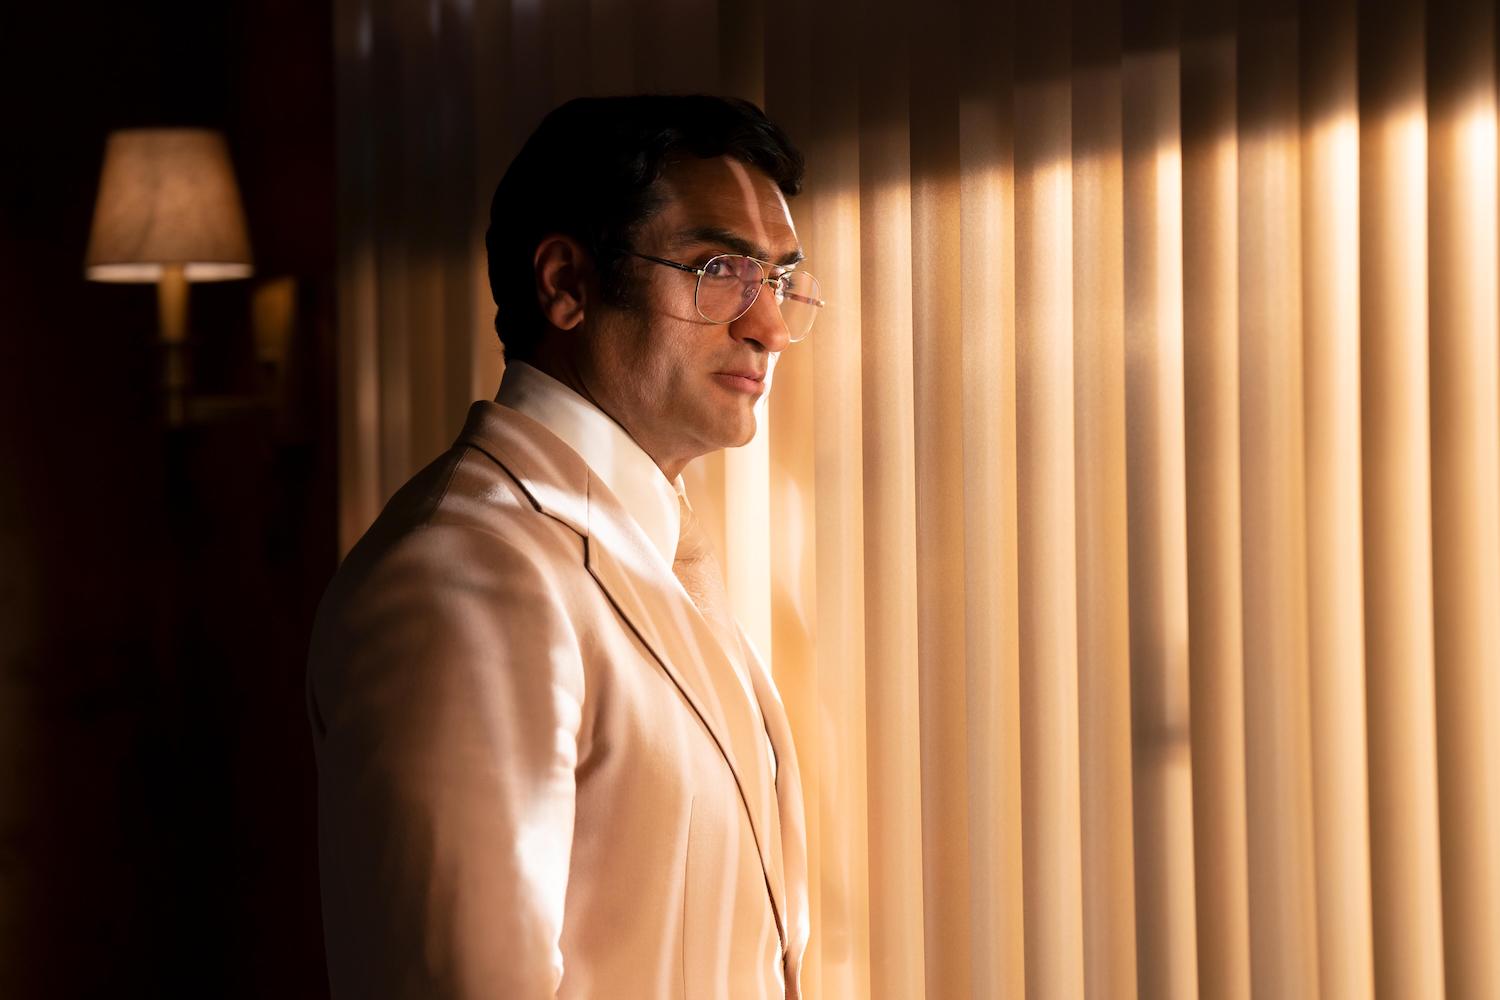 The Hulu Original 'Welcome to Chippendales' stars Kumail Nanjiani as Somen "Steve" Bannerjee and is seen here standing in front of blinds with shadows on his face in a production still.